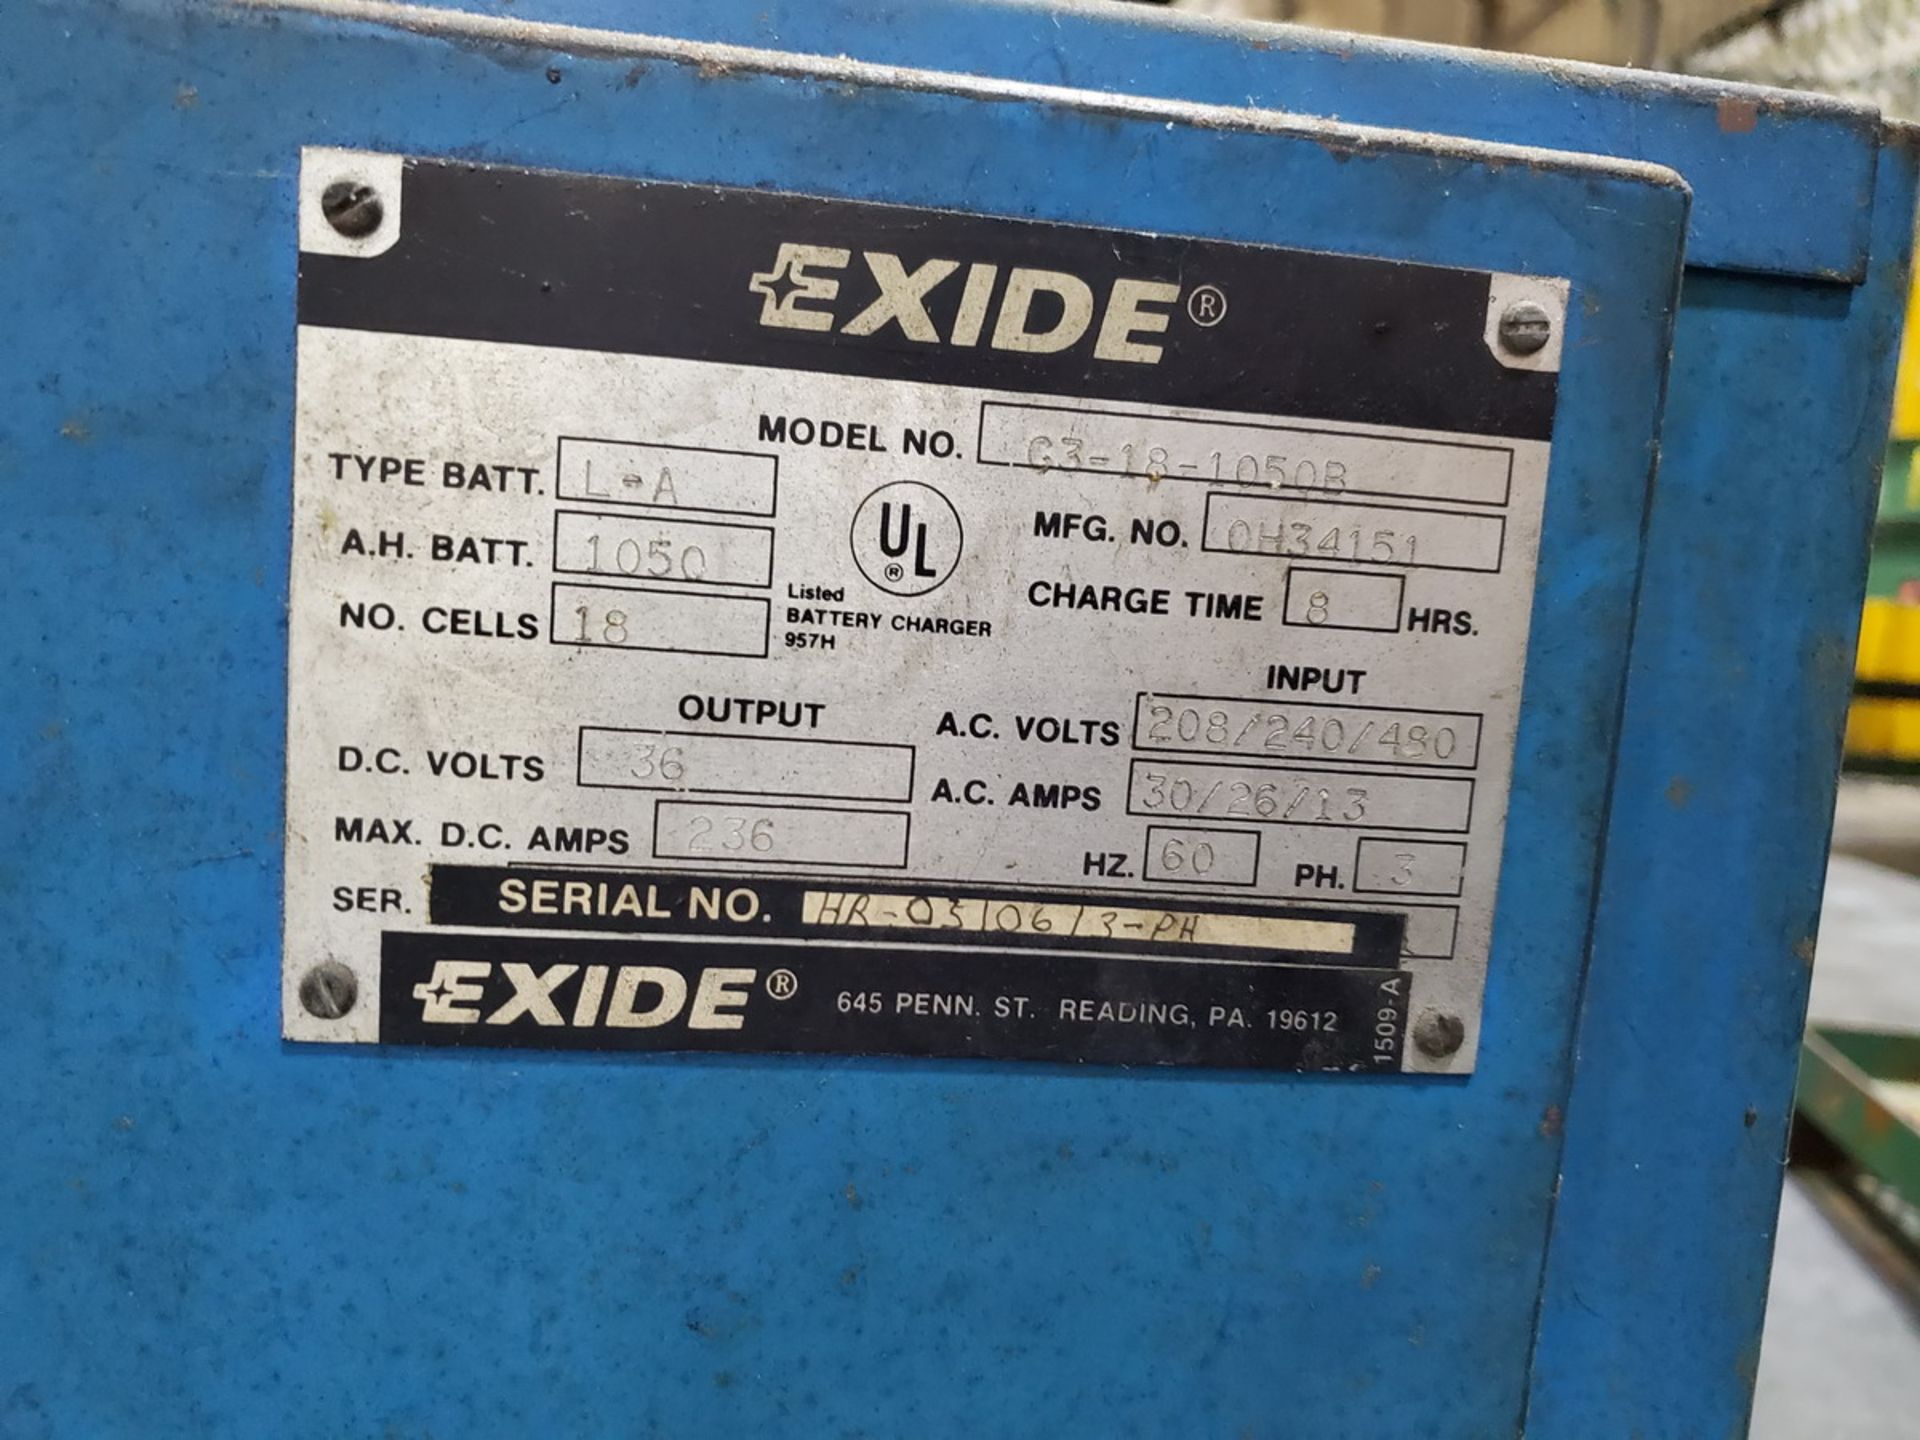 Exide Industrial Battery Charger 8hr Charge Time, 208/240/480V, 3PH, 60HZ - Image 6 of 6